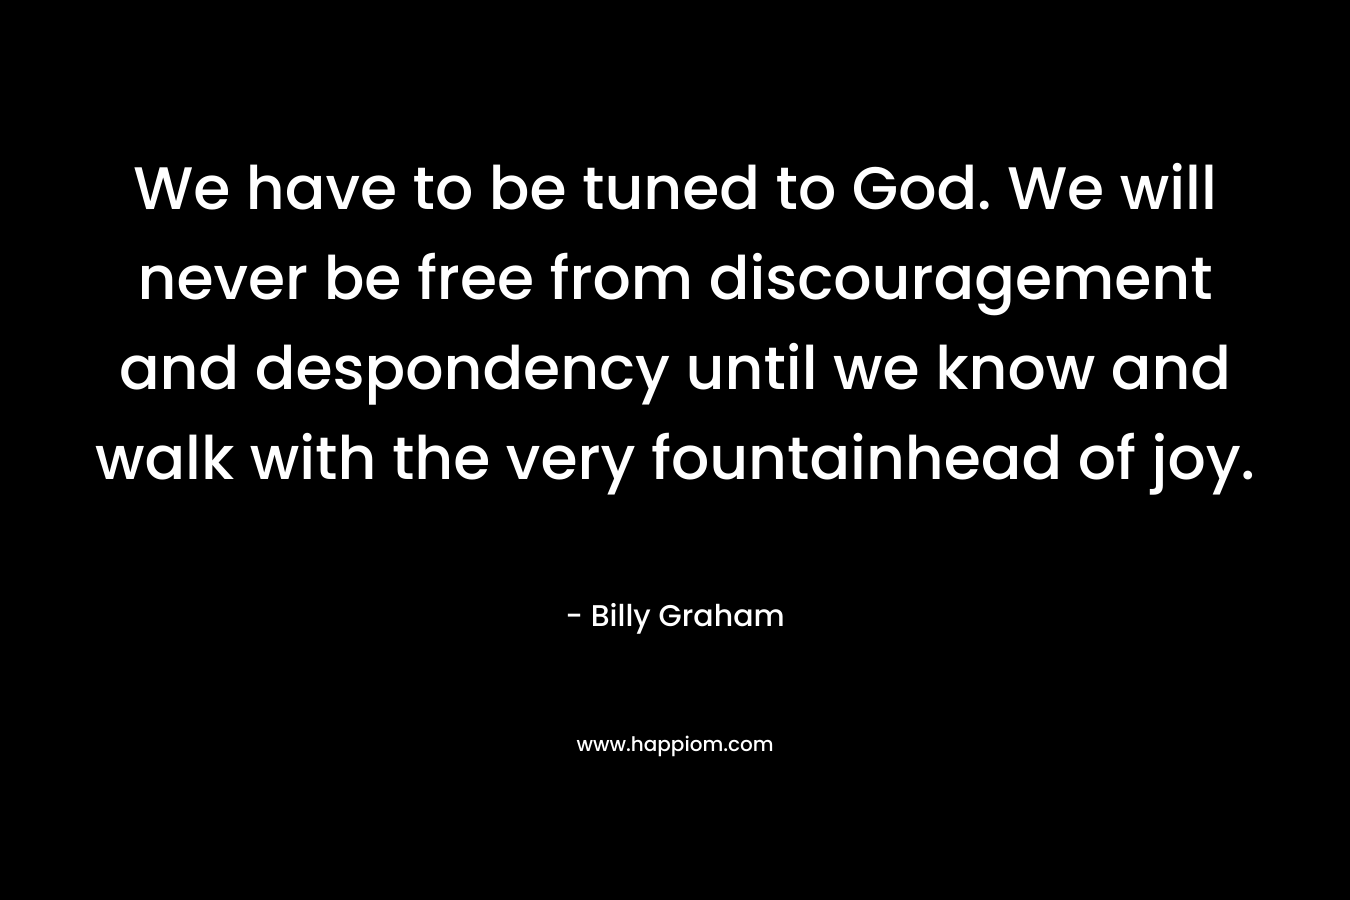 We have to be tuned to God. We will never be free from discouragement and despondency until we know and walk with the very fountainhead of joy. – Billy Graham